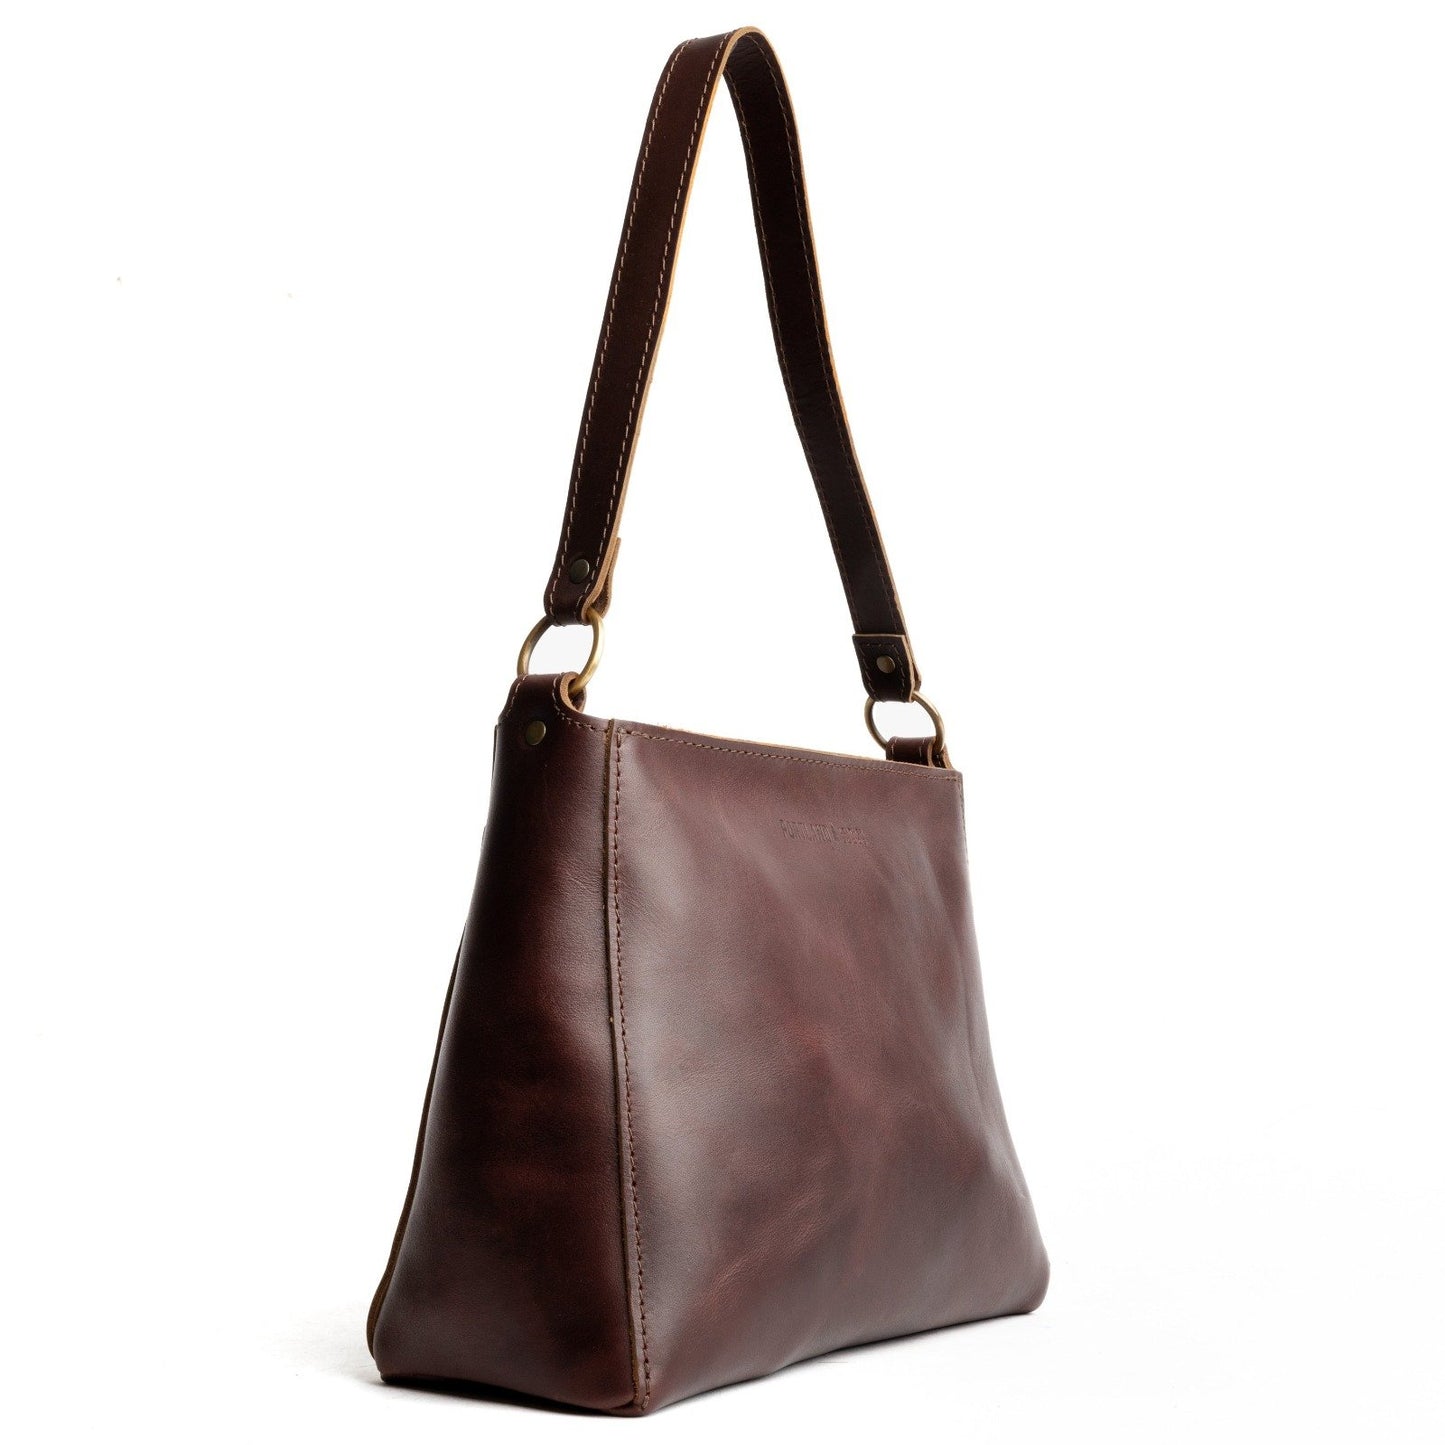 All Color: Grizzly | Triangle Leather Handmade Bag